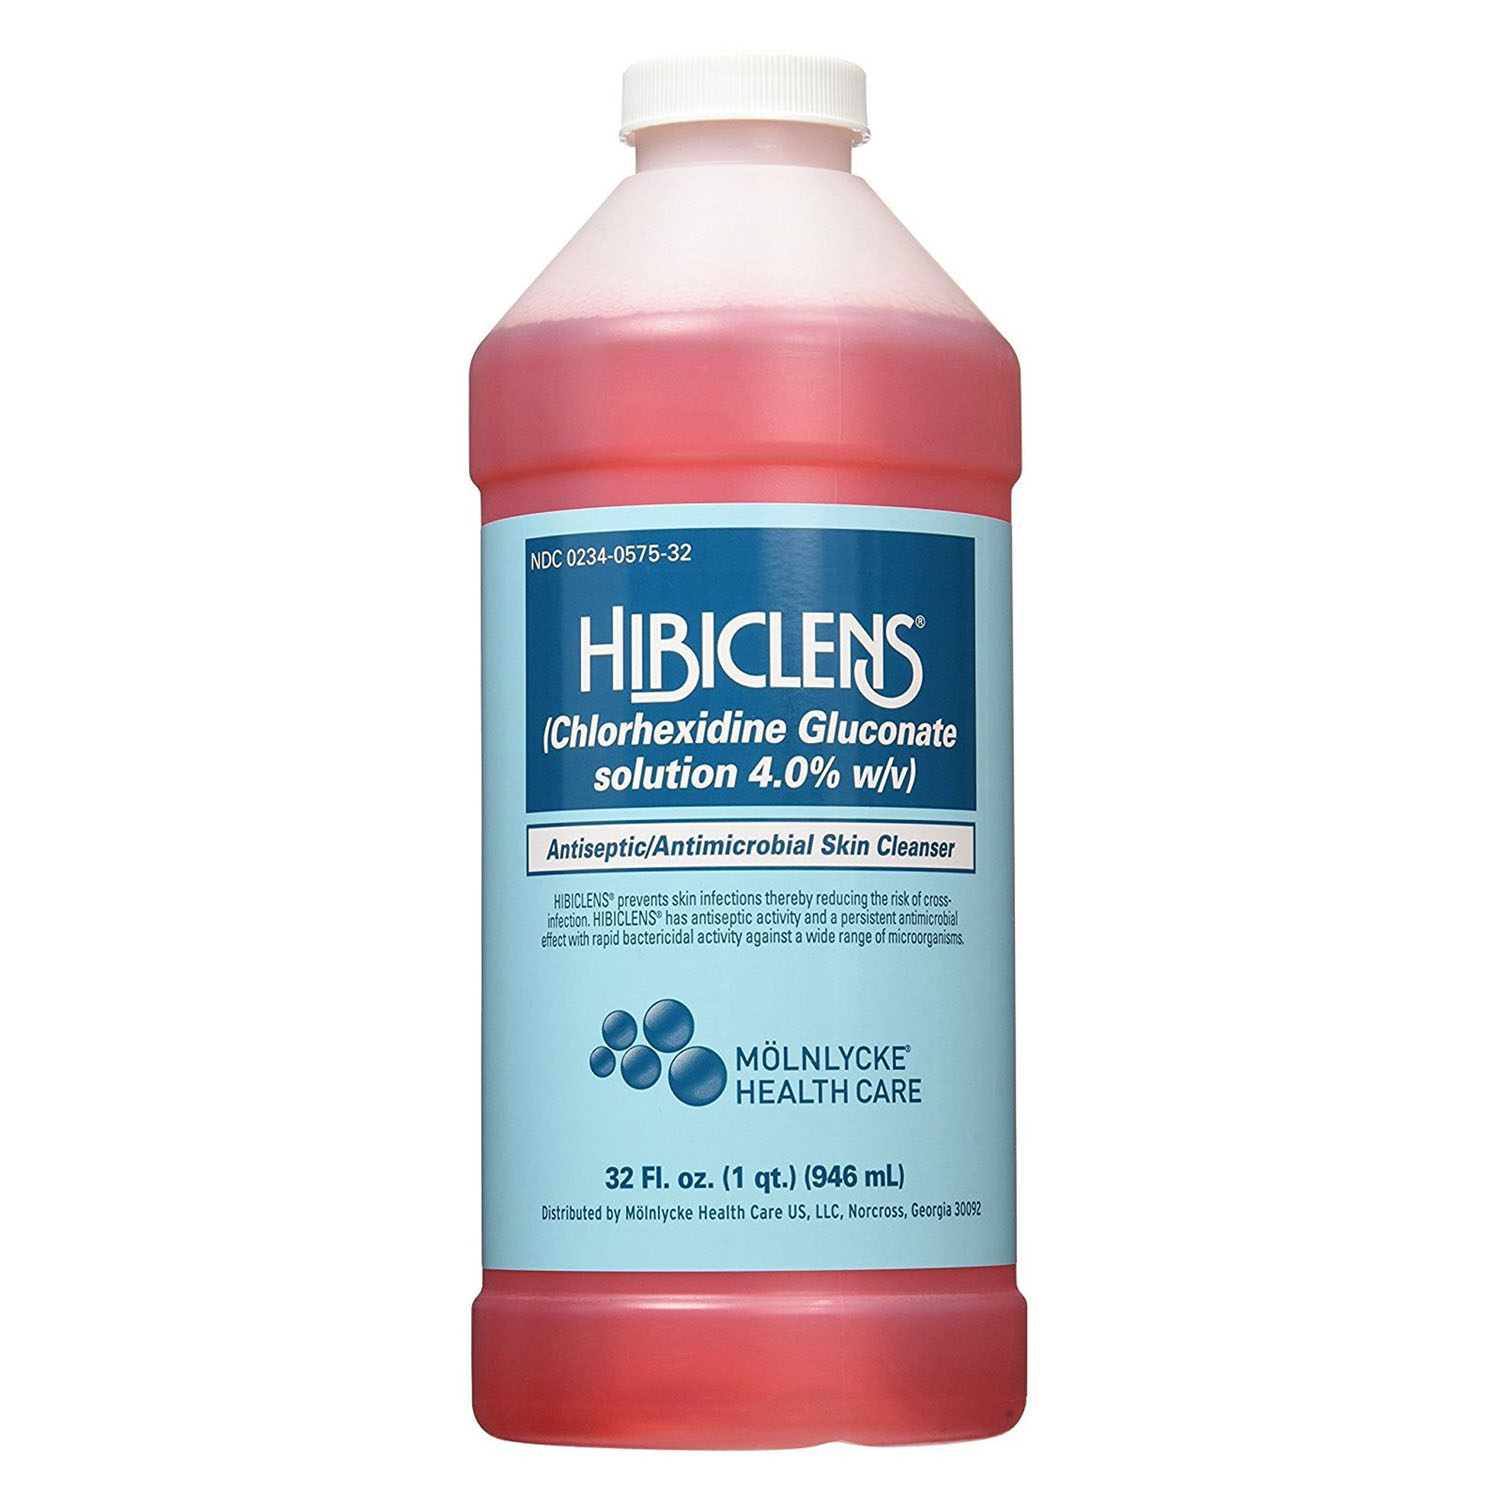 MOLNLYCKE HIBICLENS® ANTISEPTIC ANTIMICROBIAL SKIN CLEANSER : 57532 EA